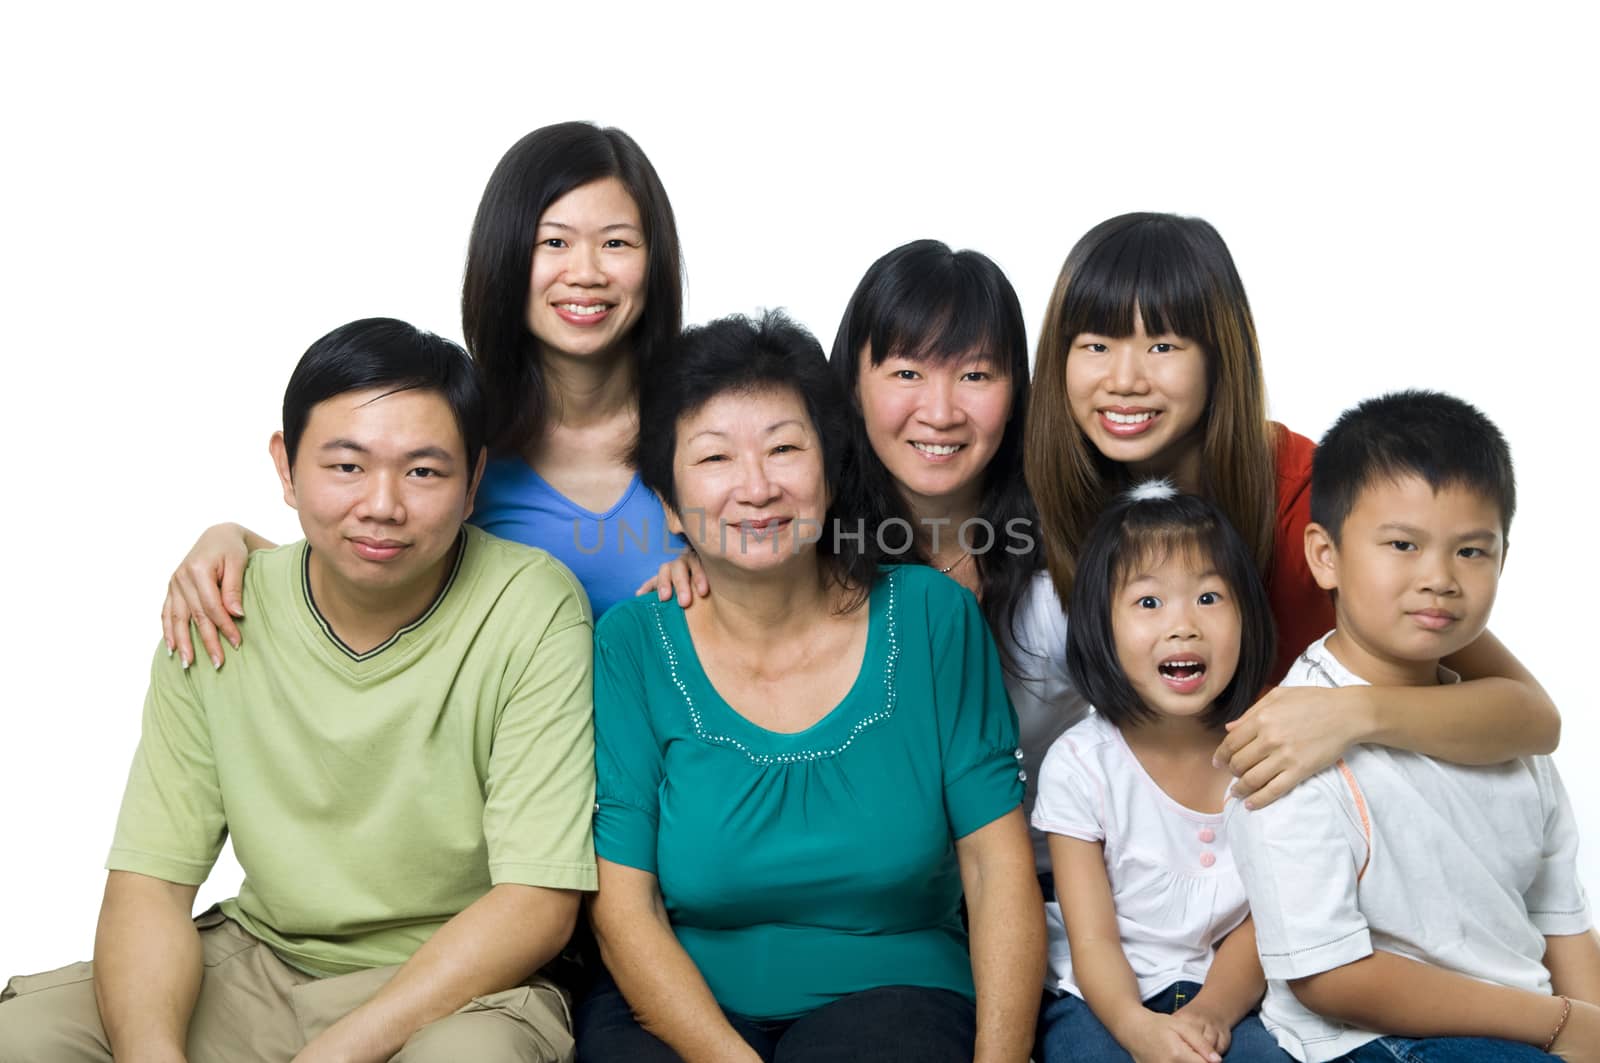 Larger Asian family portrait on white background, three generations.